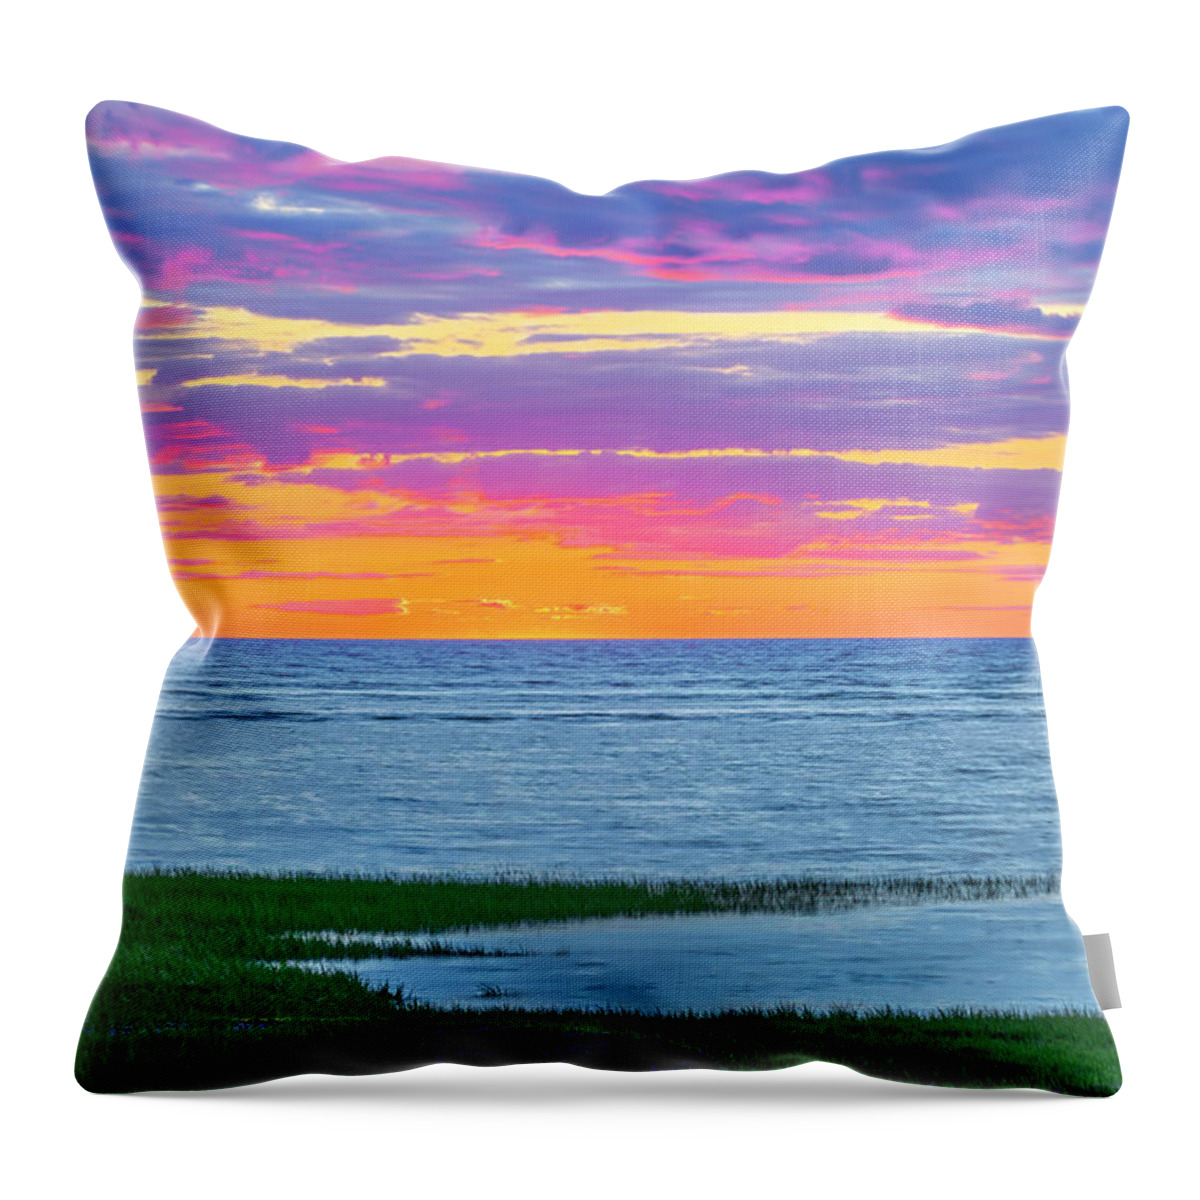 Rock Harbor Beach Throw Pillow featuring the photograph Cape Cod Rock Harbor Beach by Juergen Roth